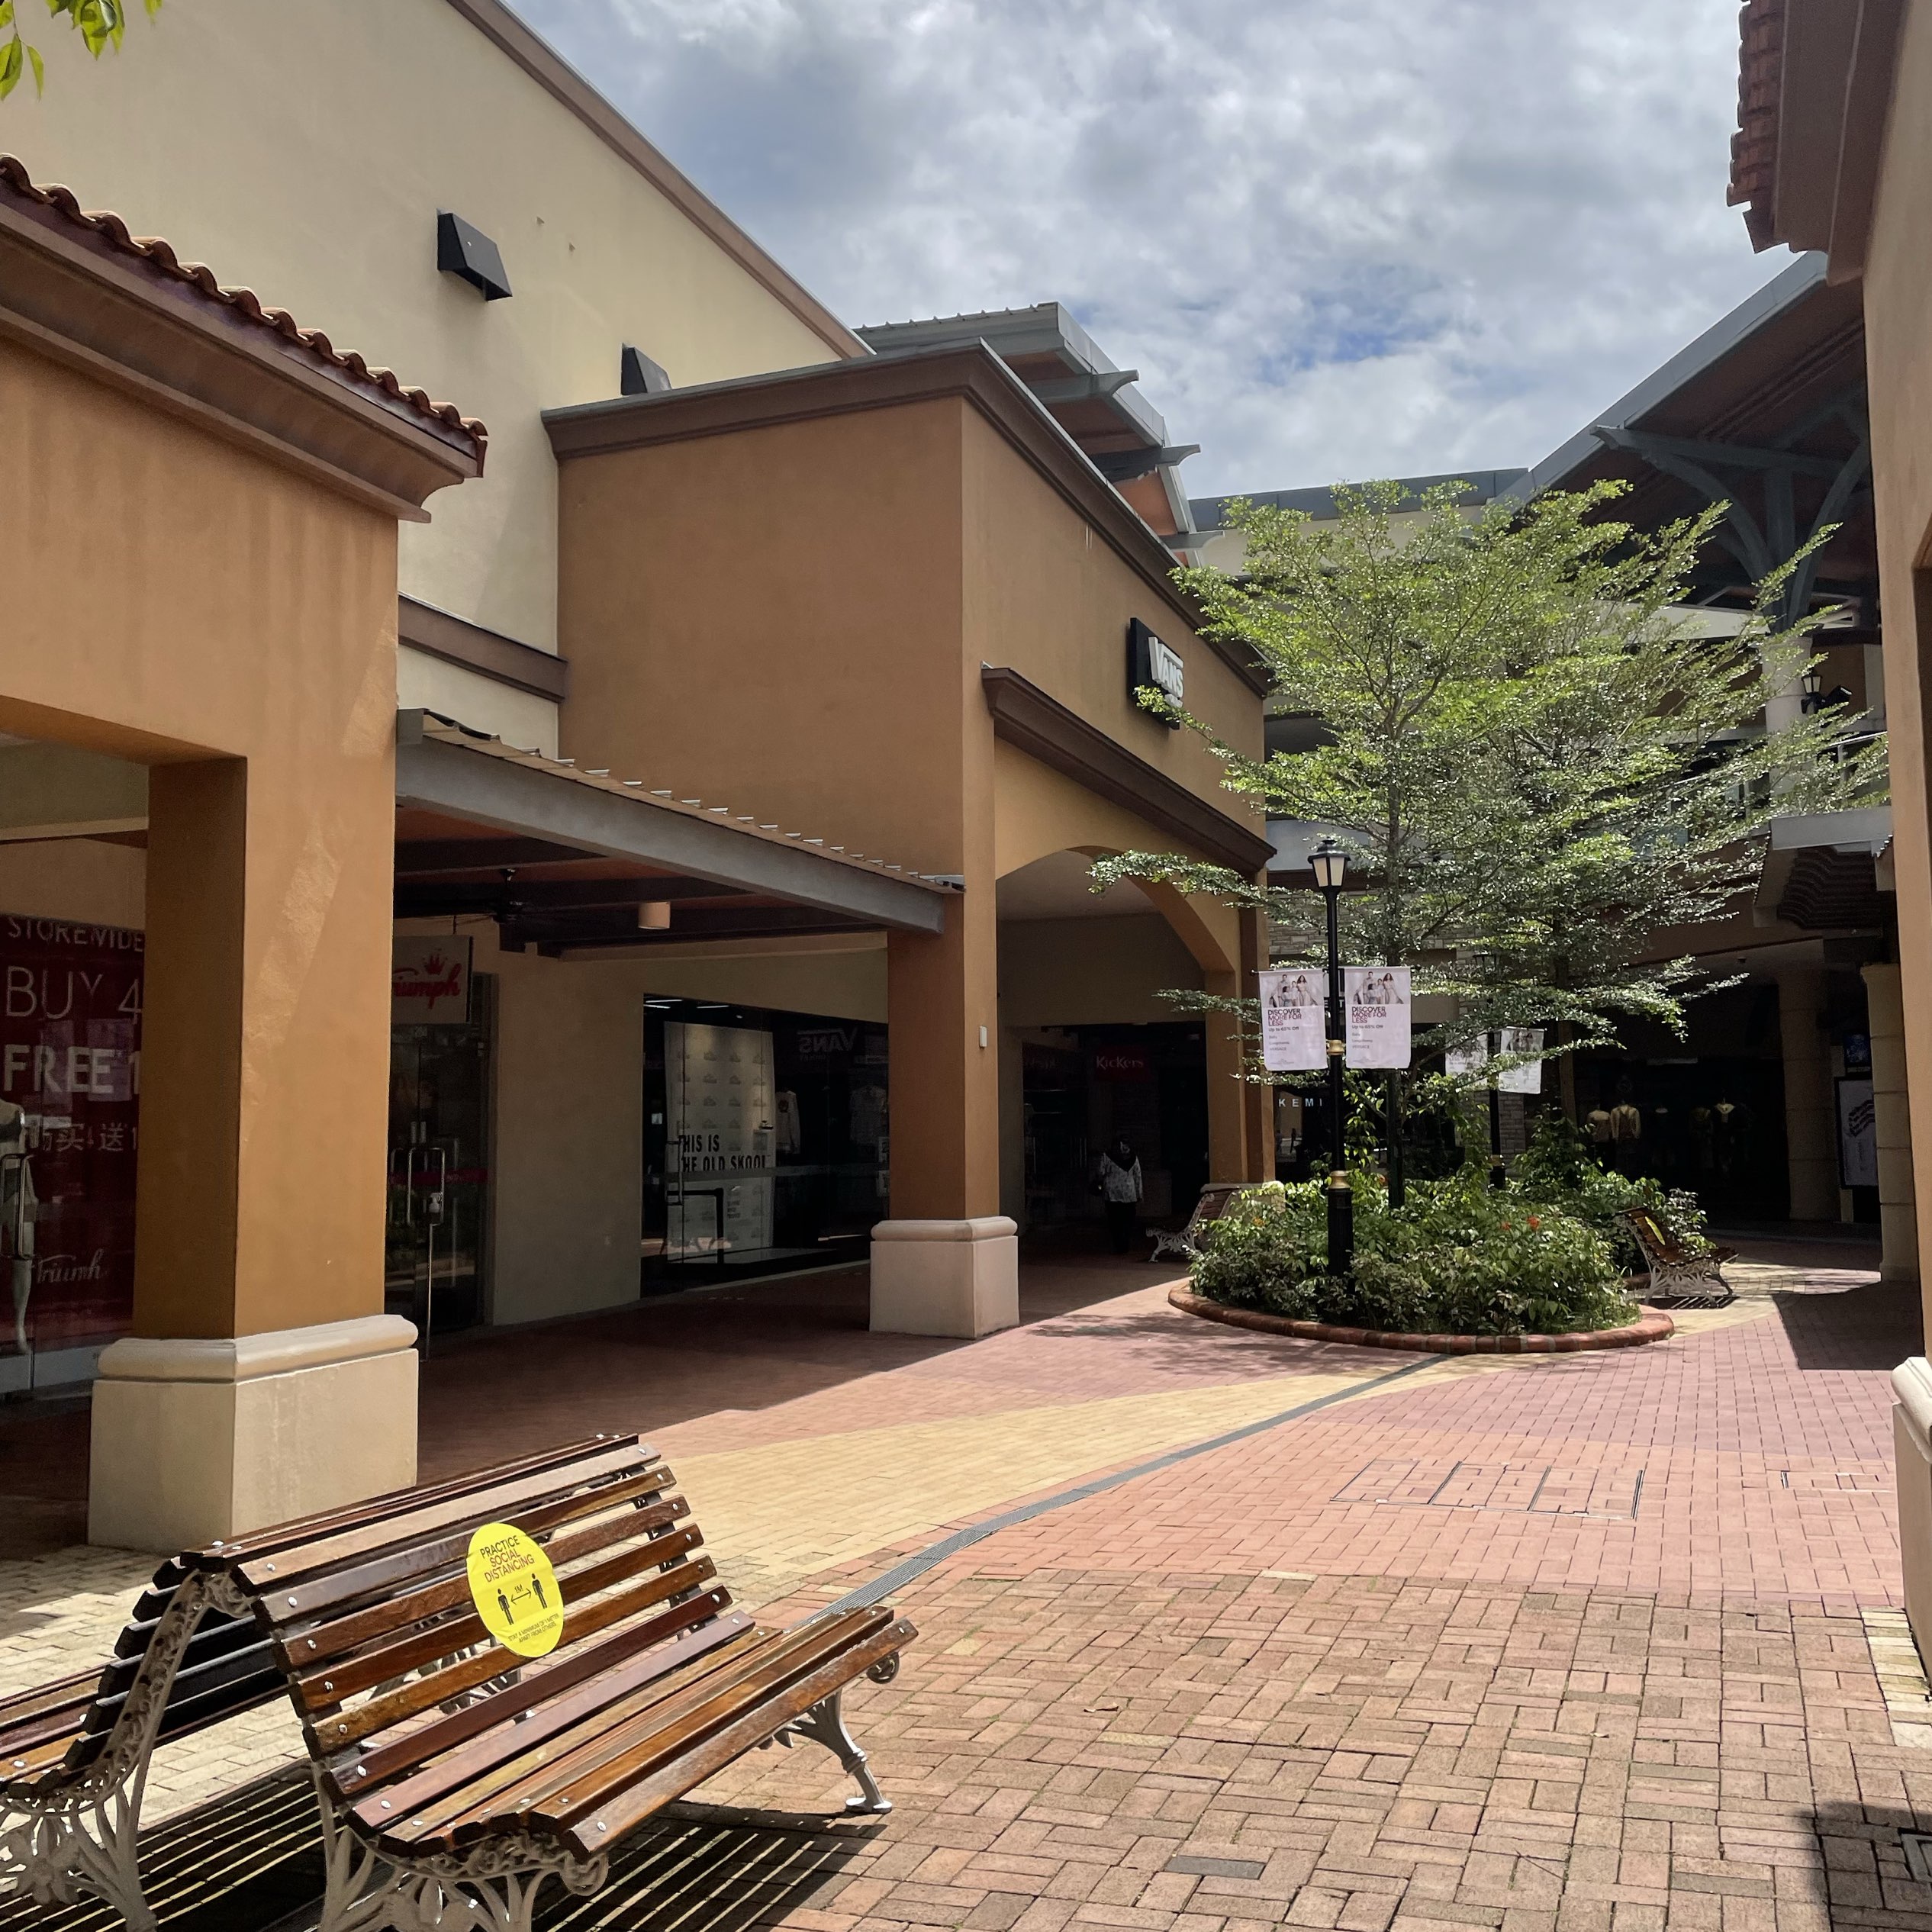 Johor Premium Outlets guide: Cheap shopping near Singapore - in JB